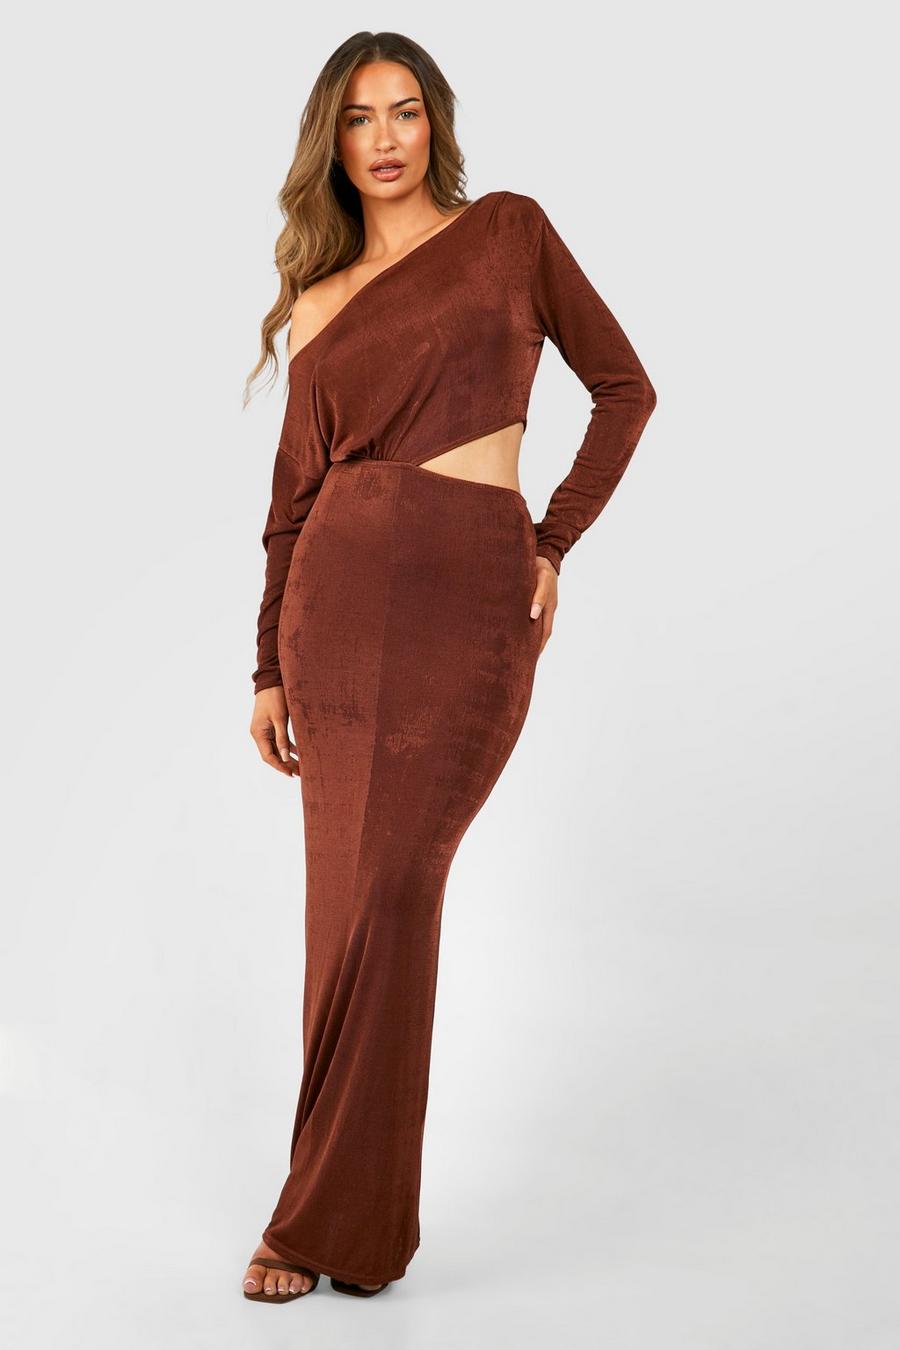 Chocolate Boat Neck Ruched Acetate Slinky Cut Out Maxi Dress image number 1